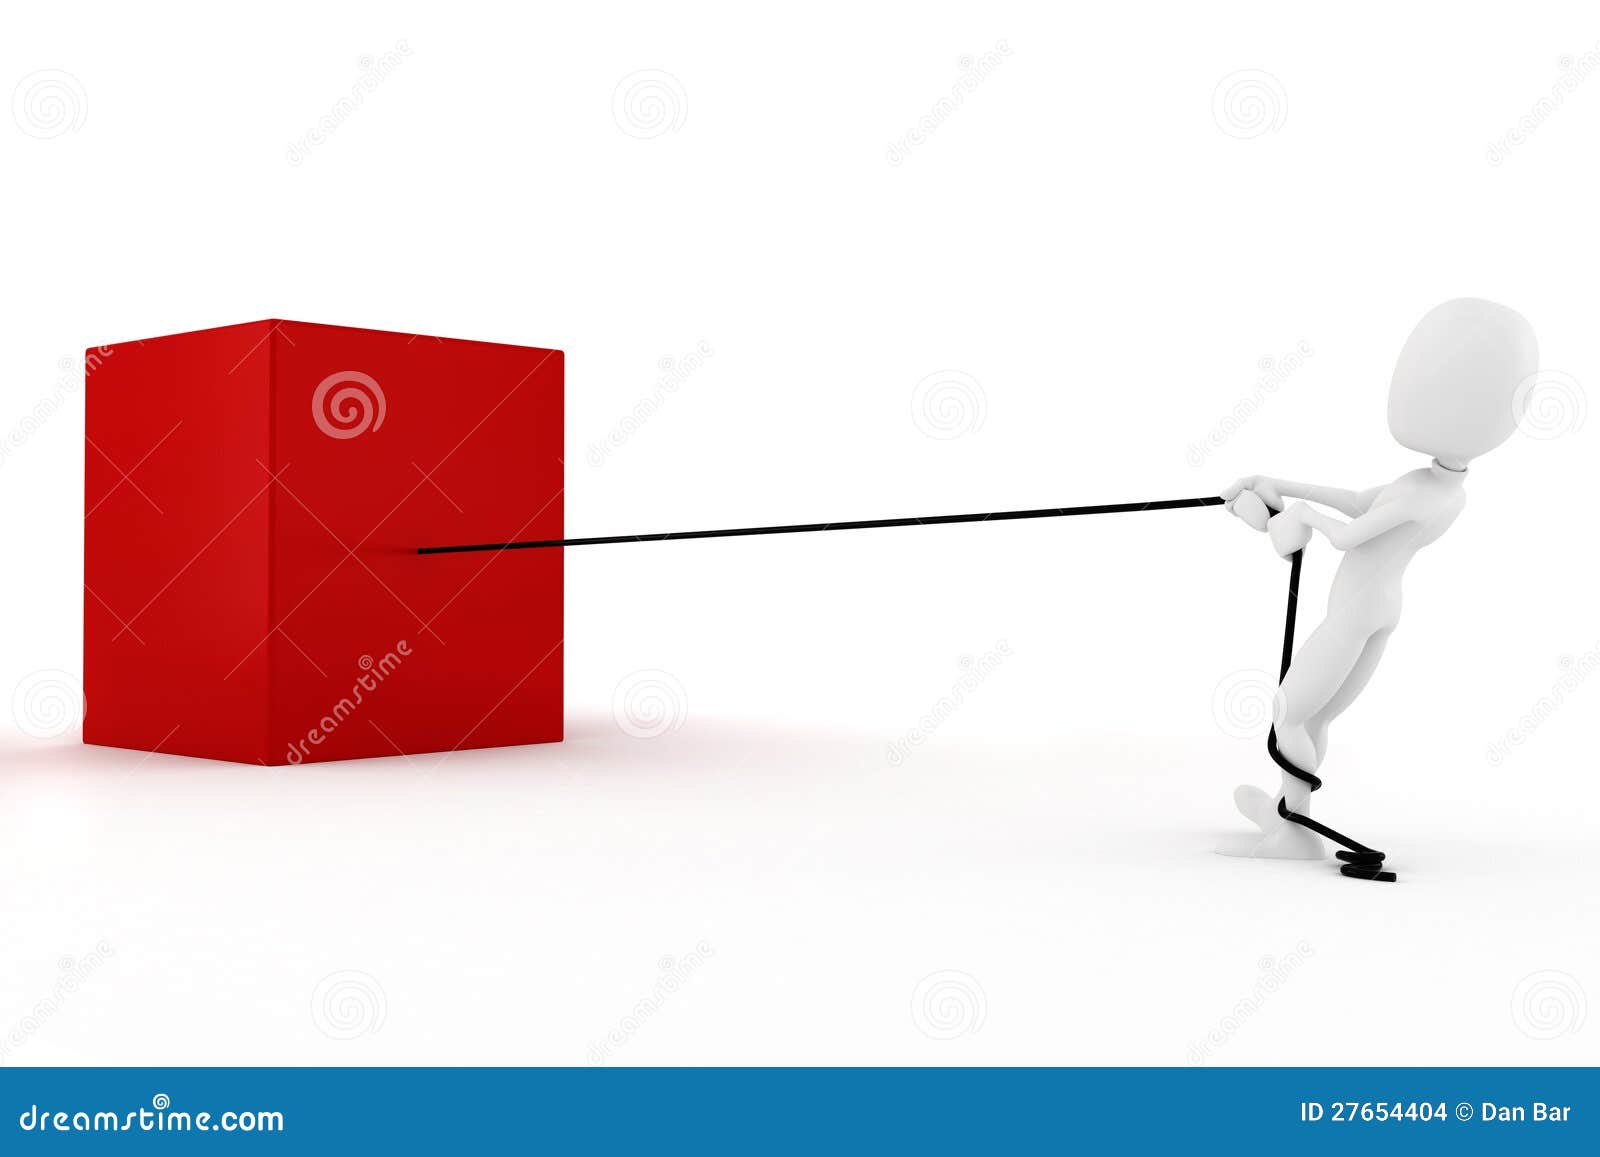 clipart man pulling rope - photo #50